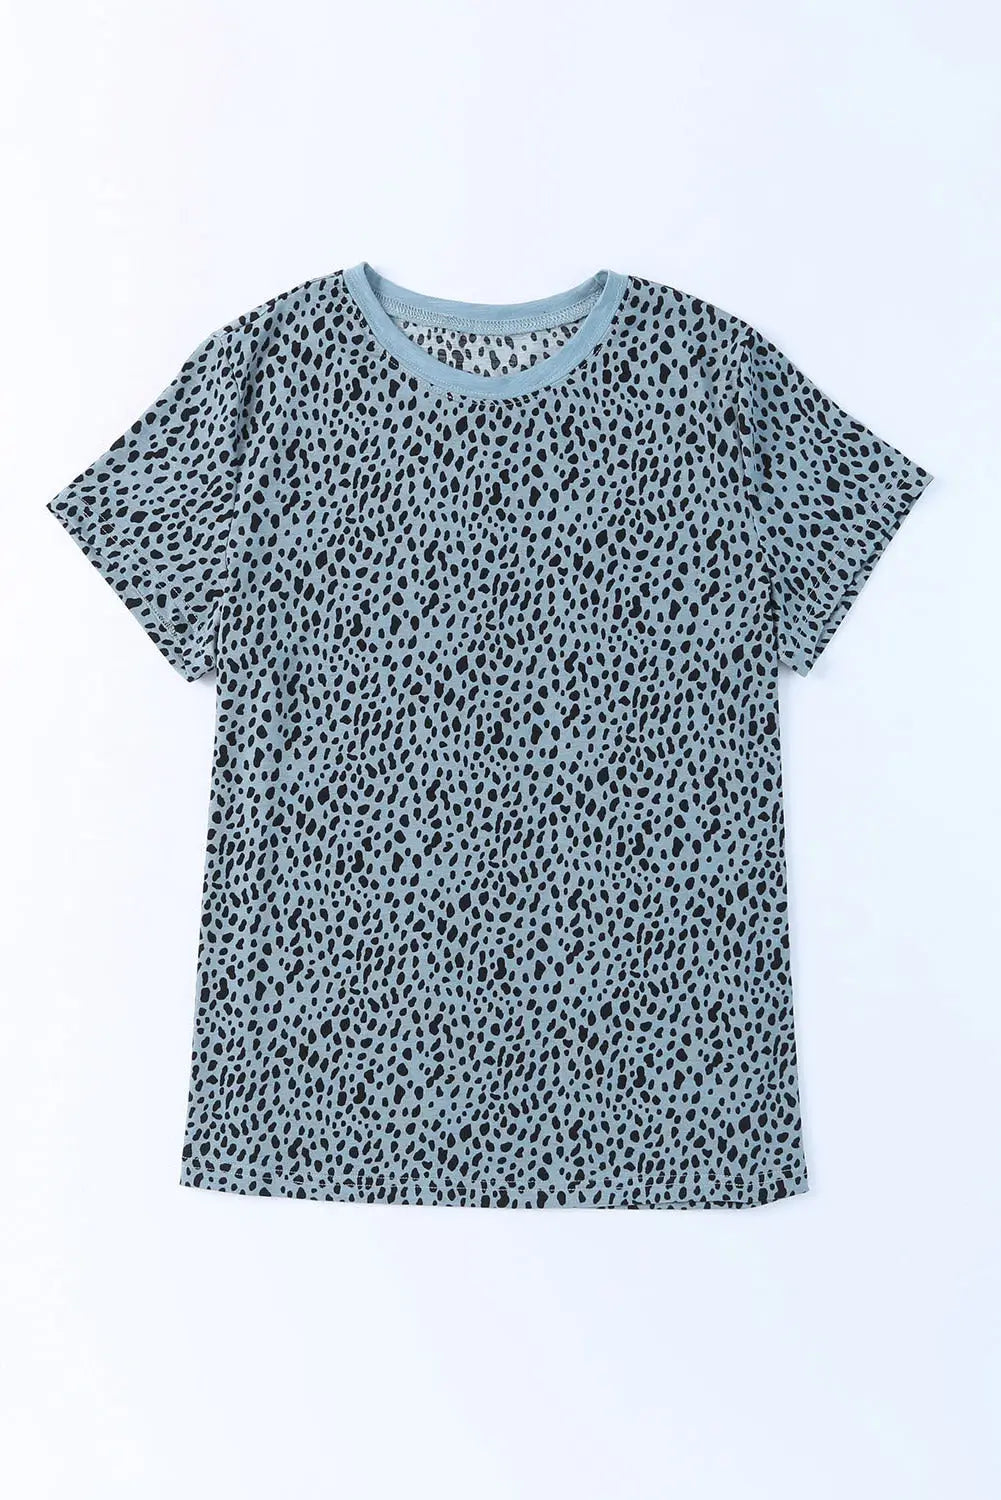 Animal Spotted Print Round Neck Long Sleeve Top-45